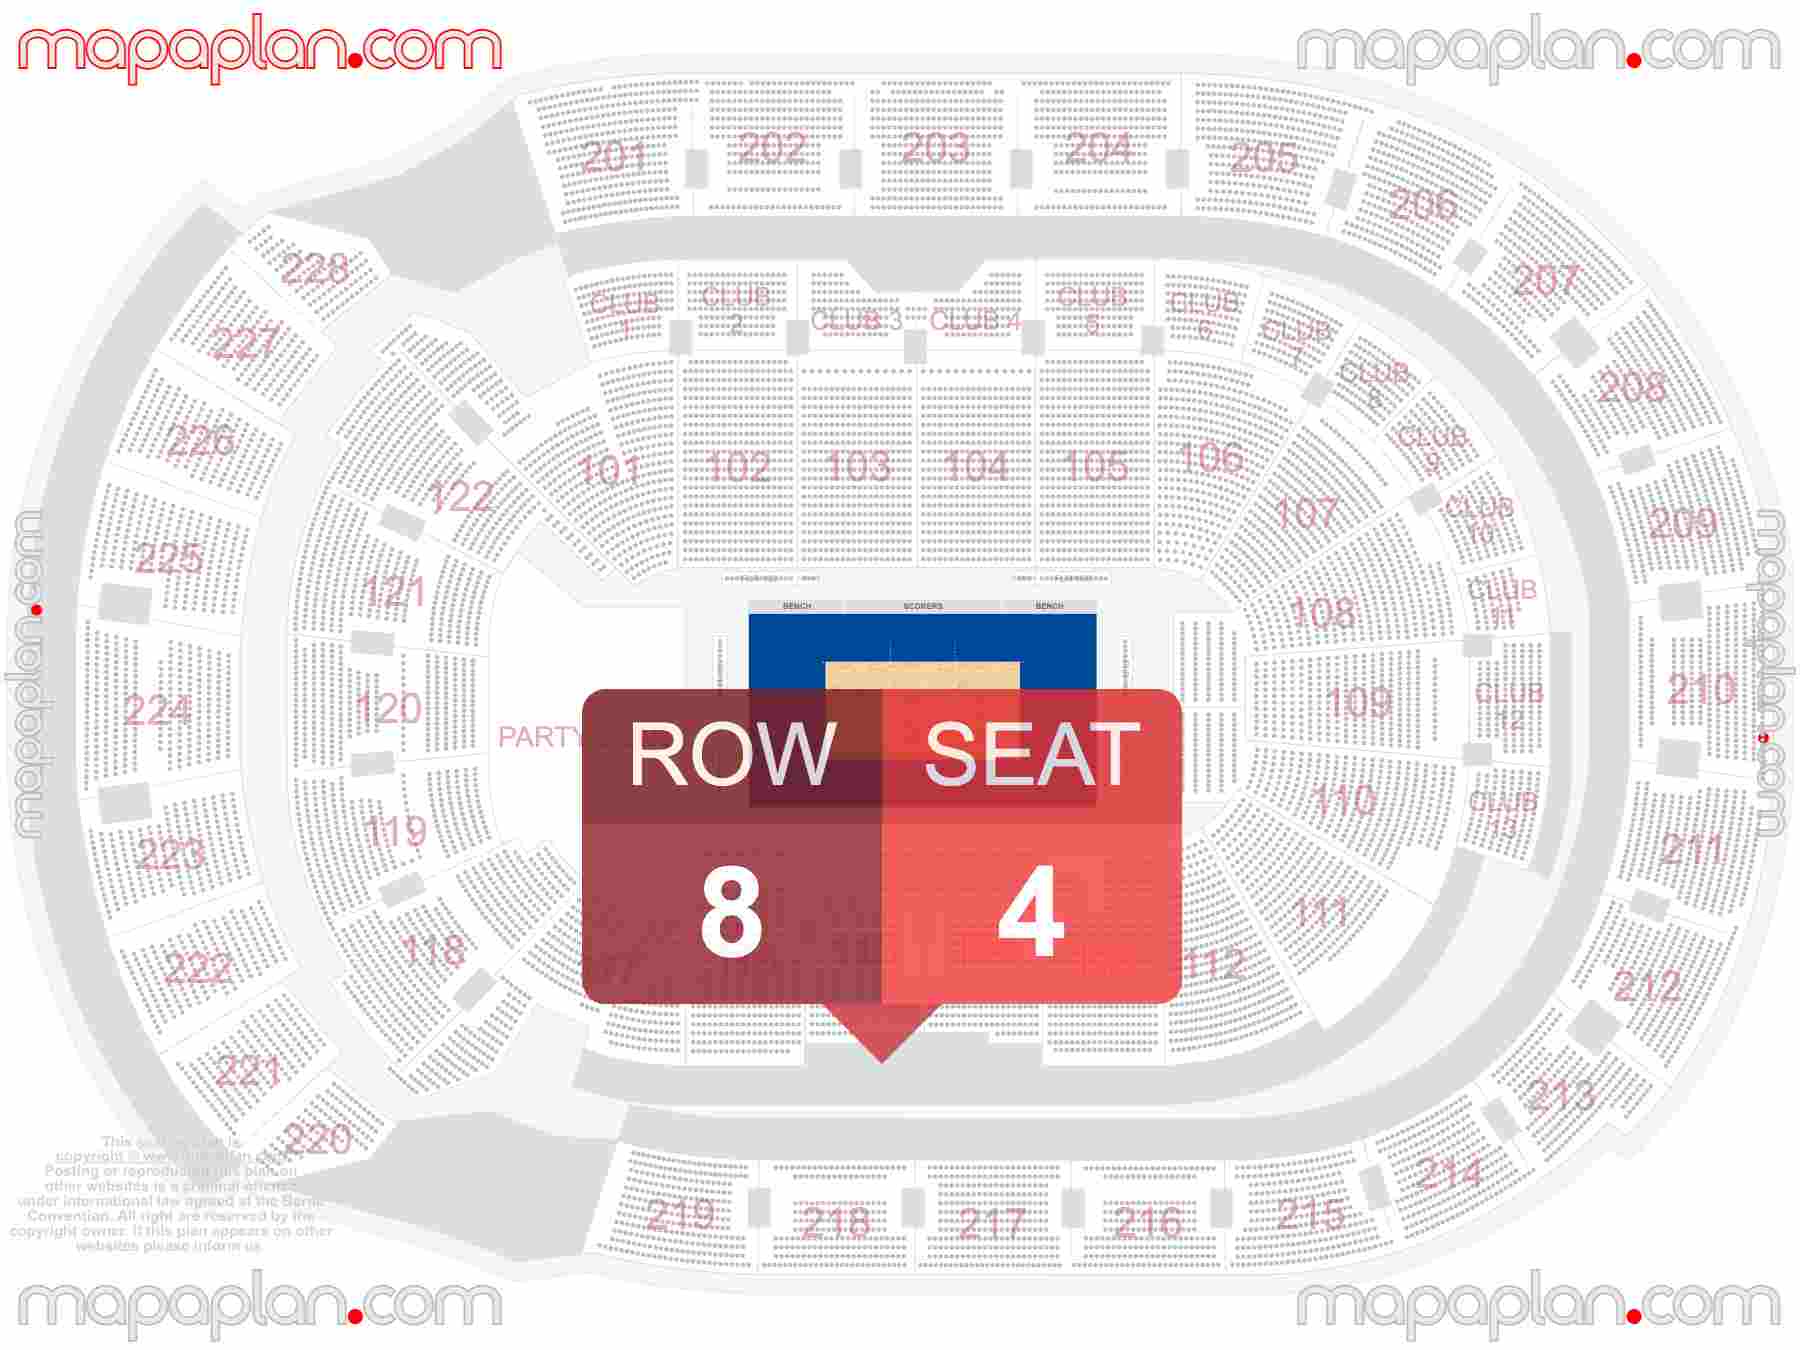 Columbus Nationwide Arena seating chart Columbus Fury volleyball detailed seating chart - 3d virtual seat numbers and row layout